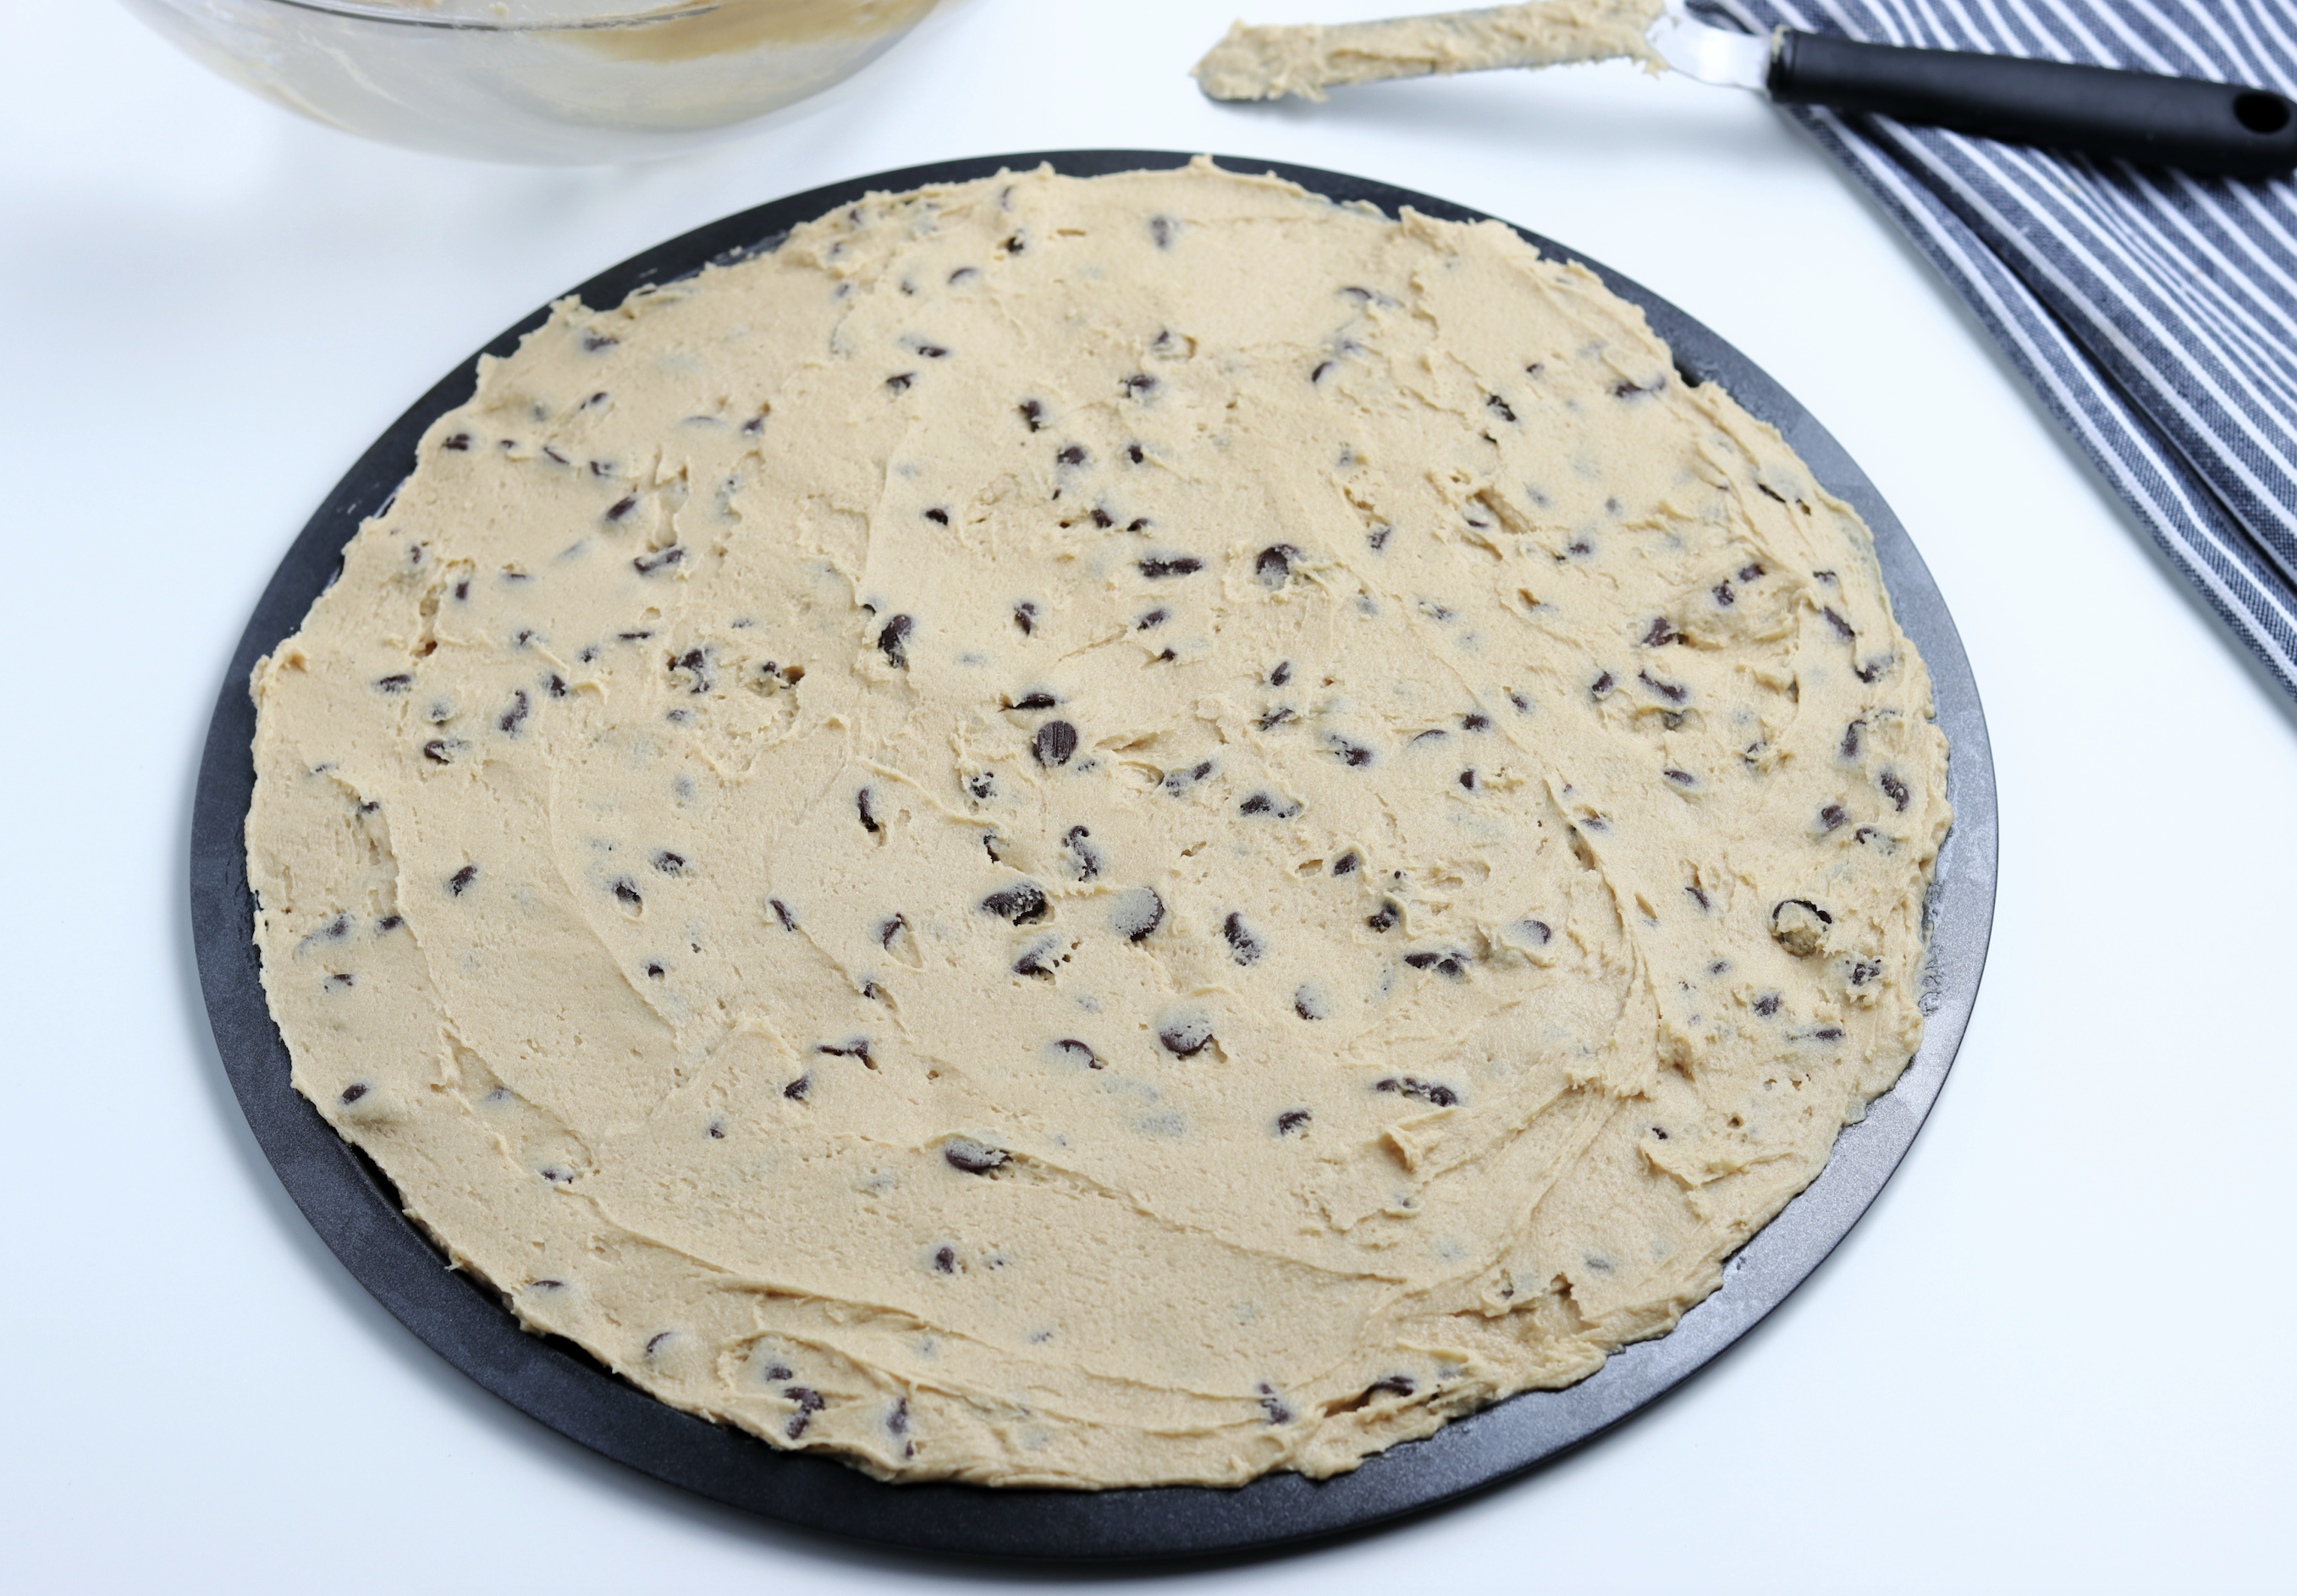 Spreading the chocolate chip cookie dough on a round pizza tray